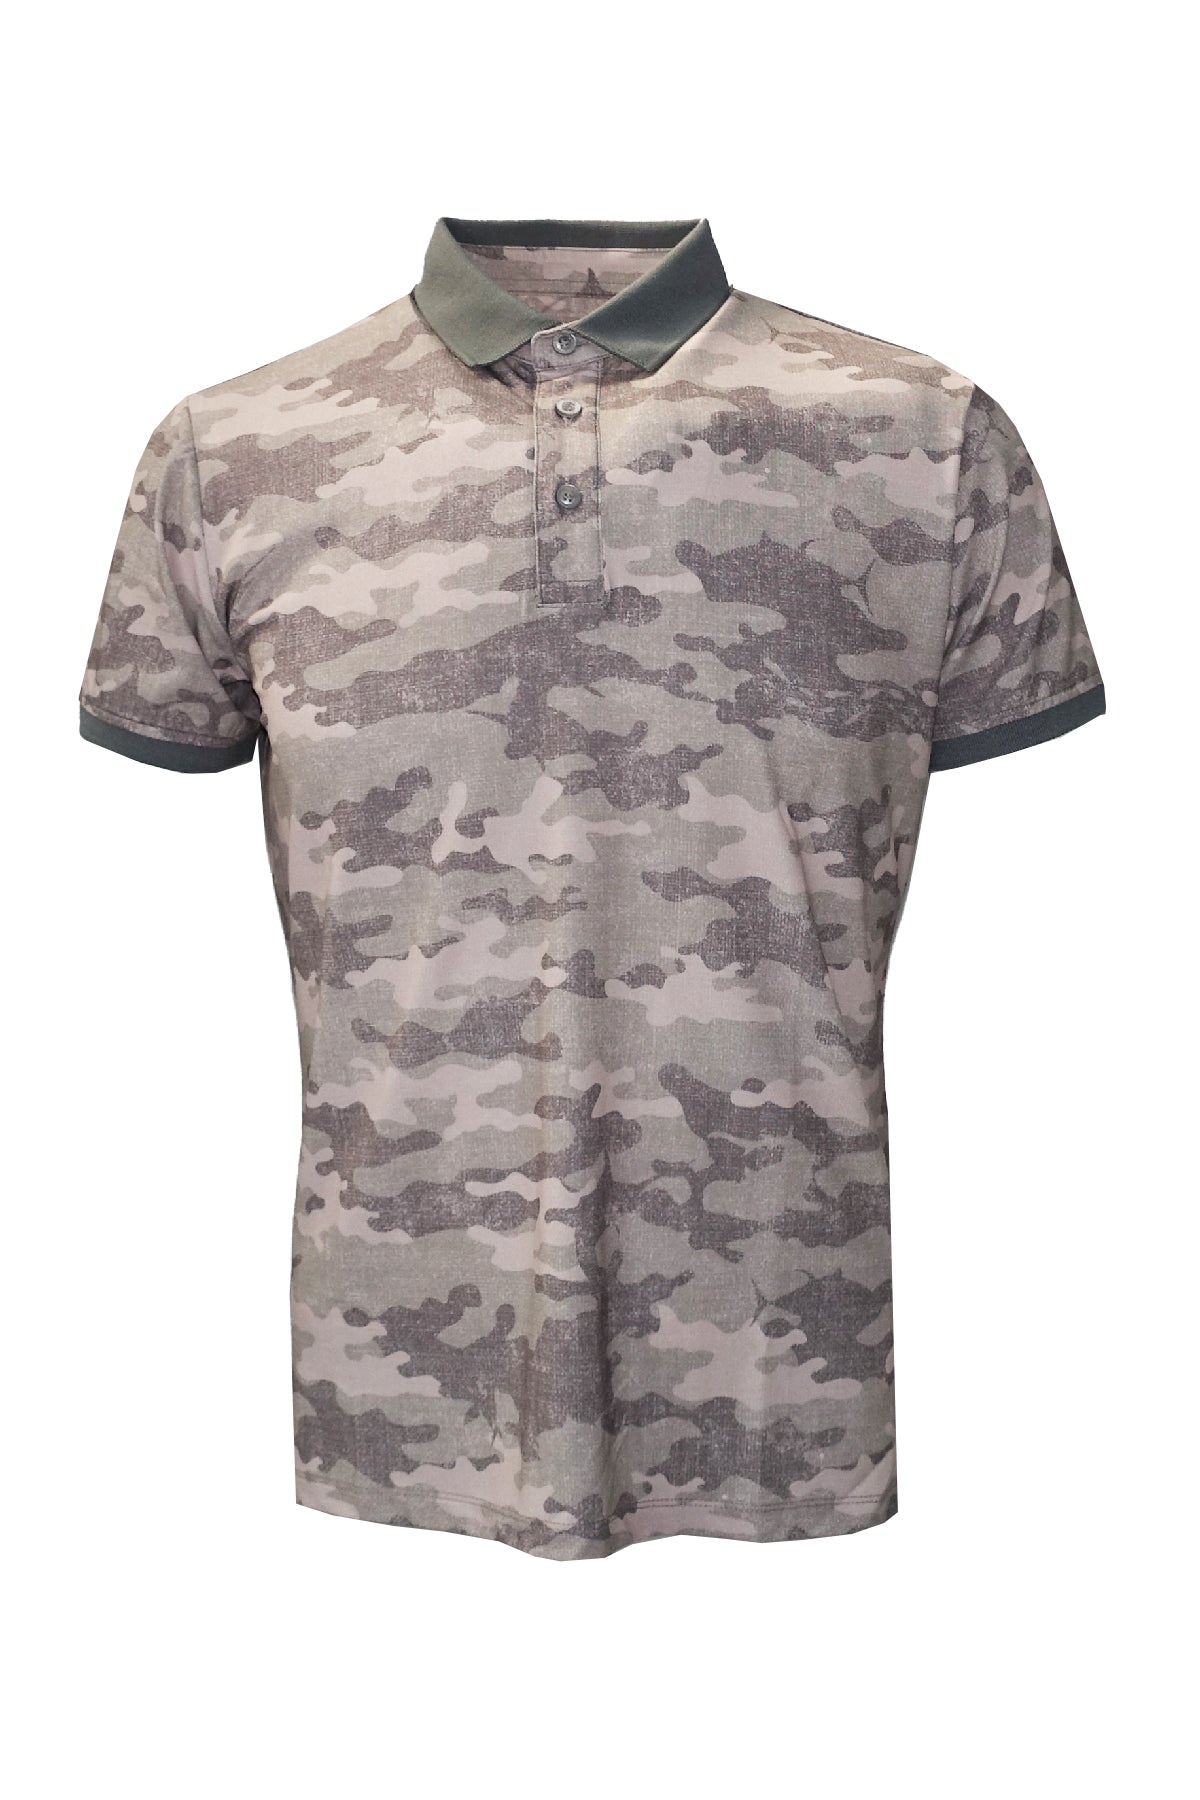 League Men's Short Sleeve Fisherman Sailor Camo Patterned Brown UV Protected Polo Shirt